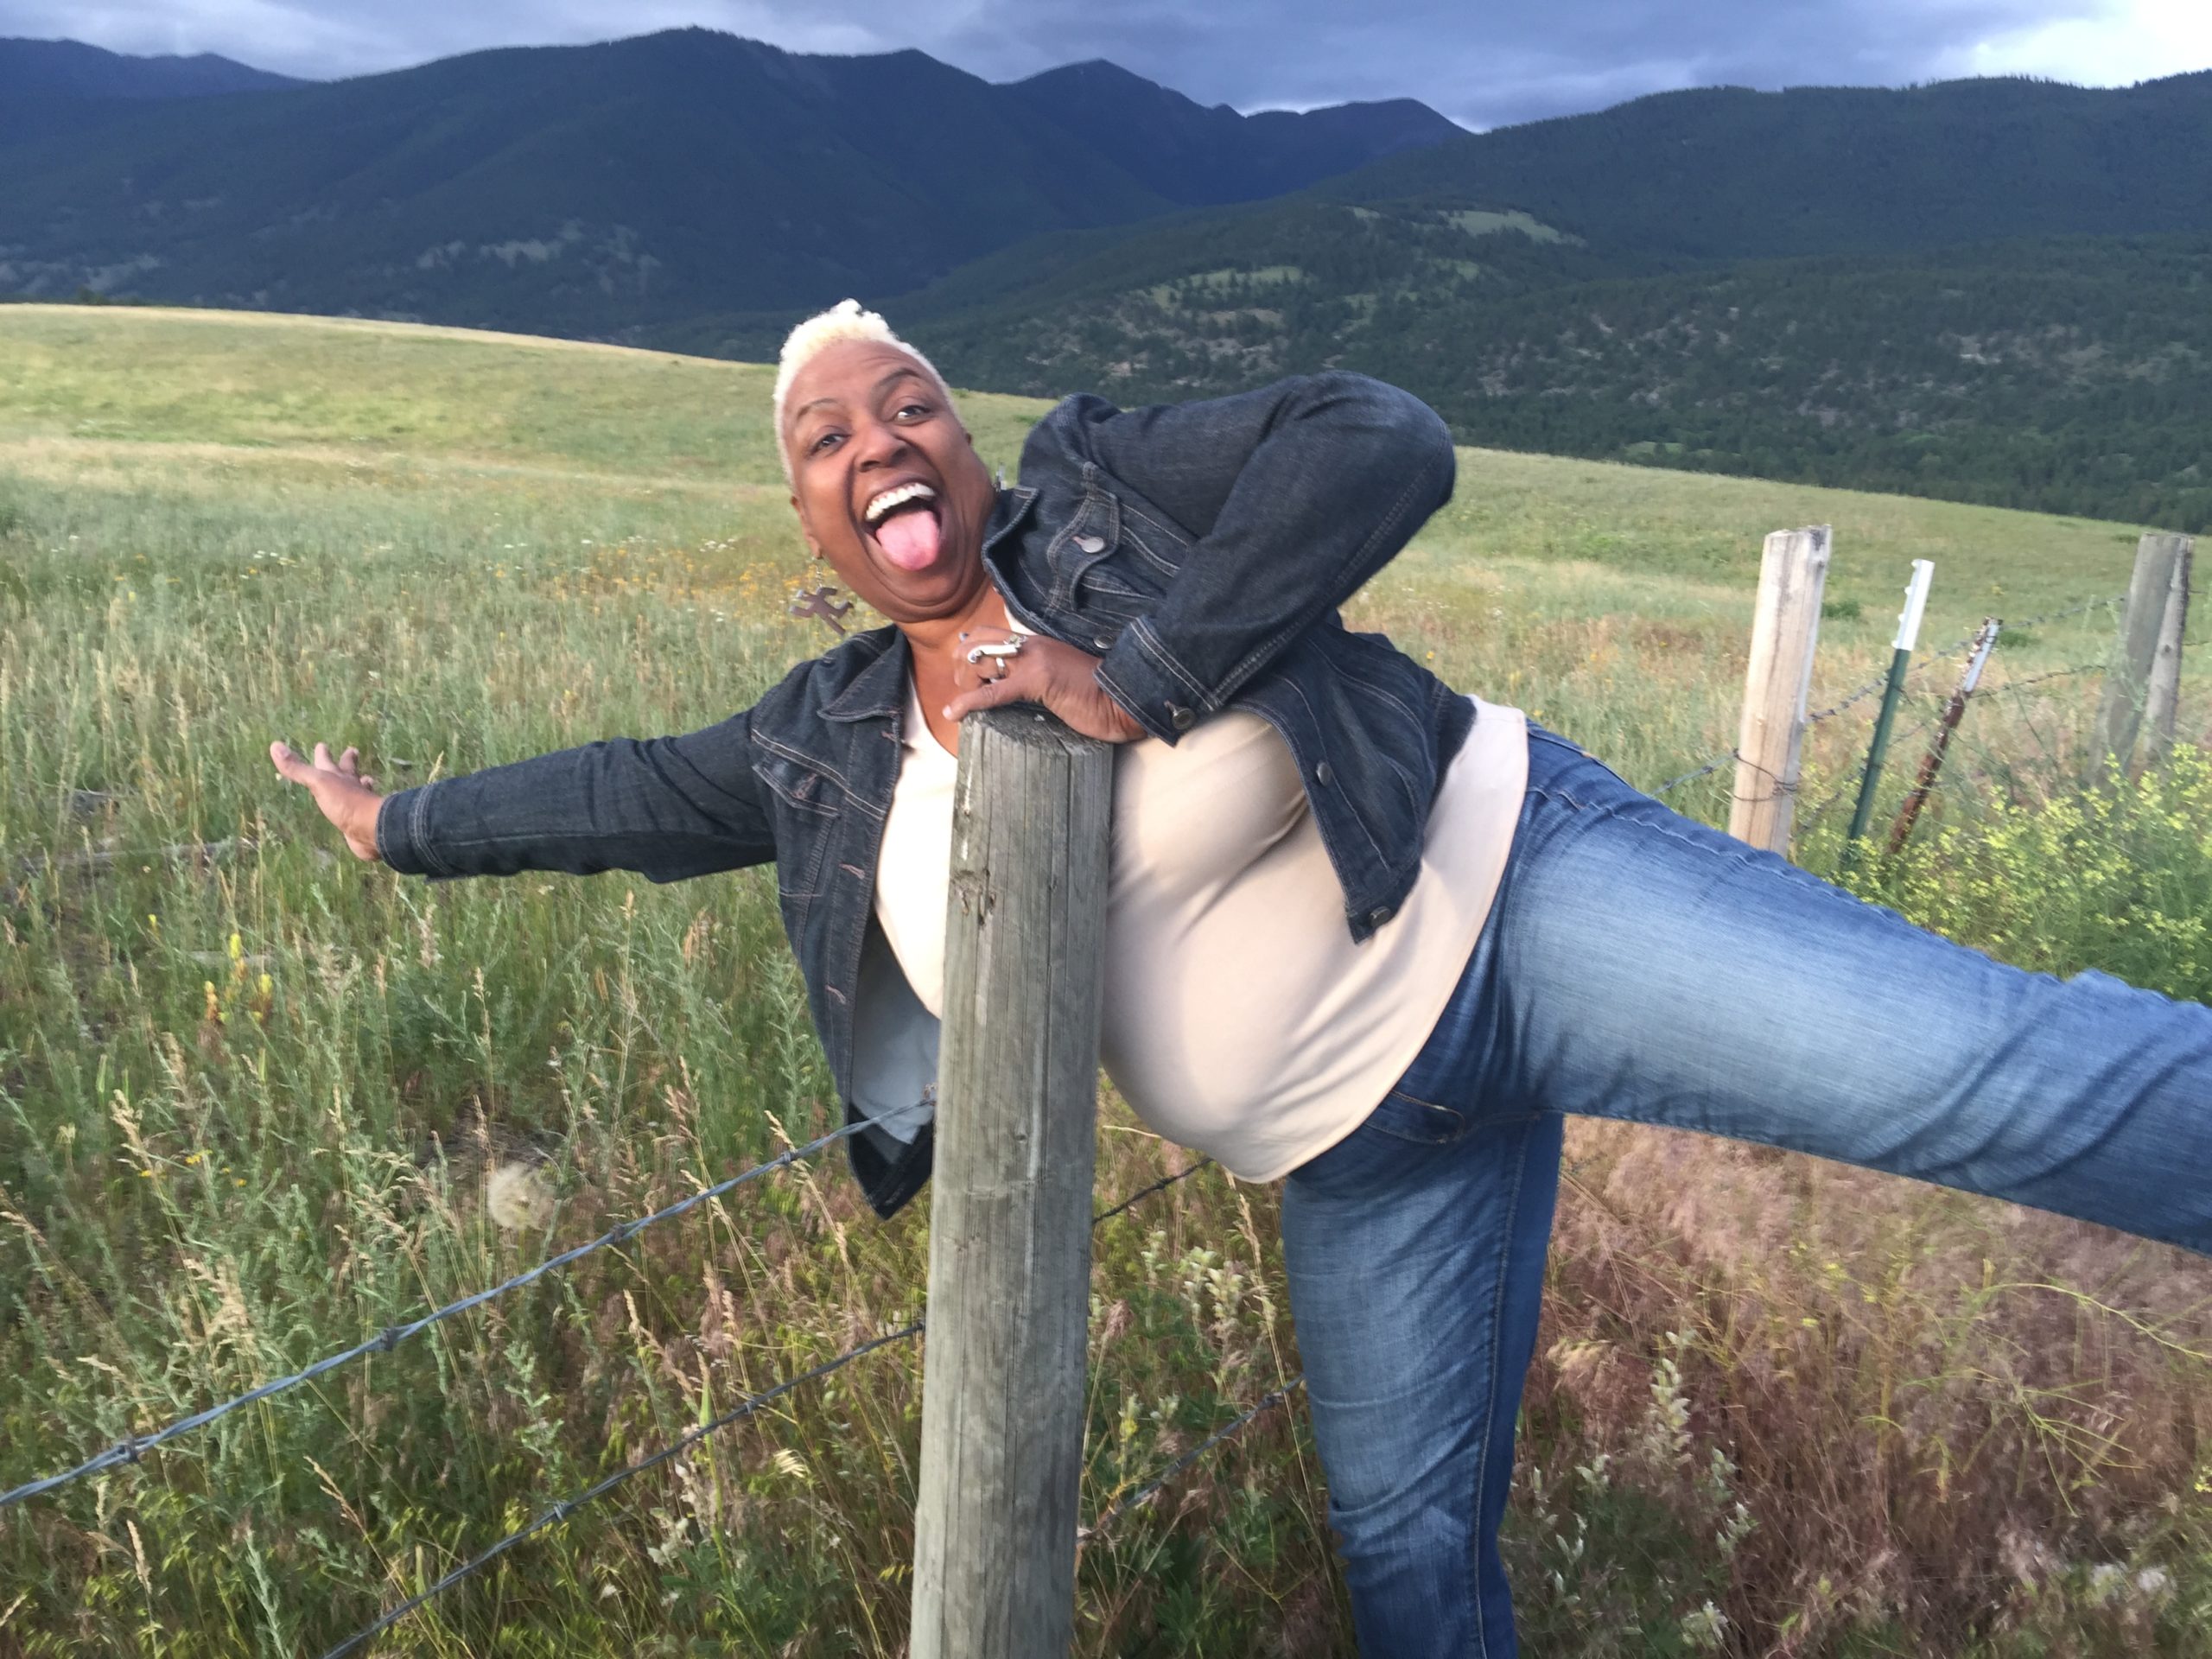 Christine Lincoln playful leans over a fence in a pasture, mountains in the background